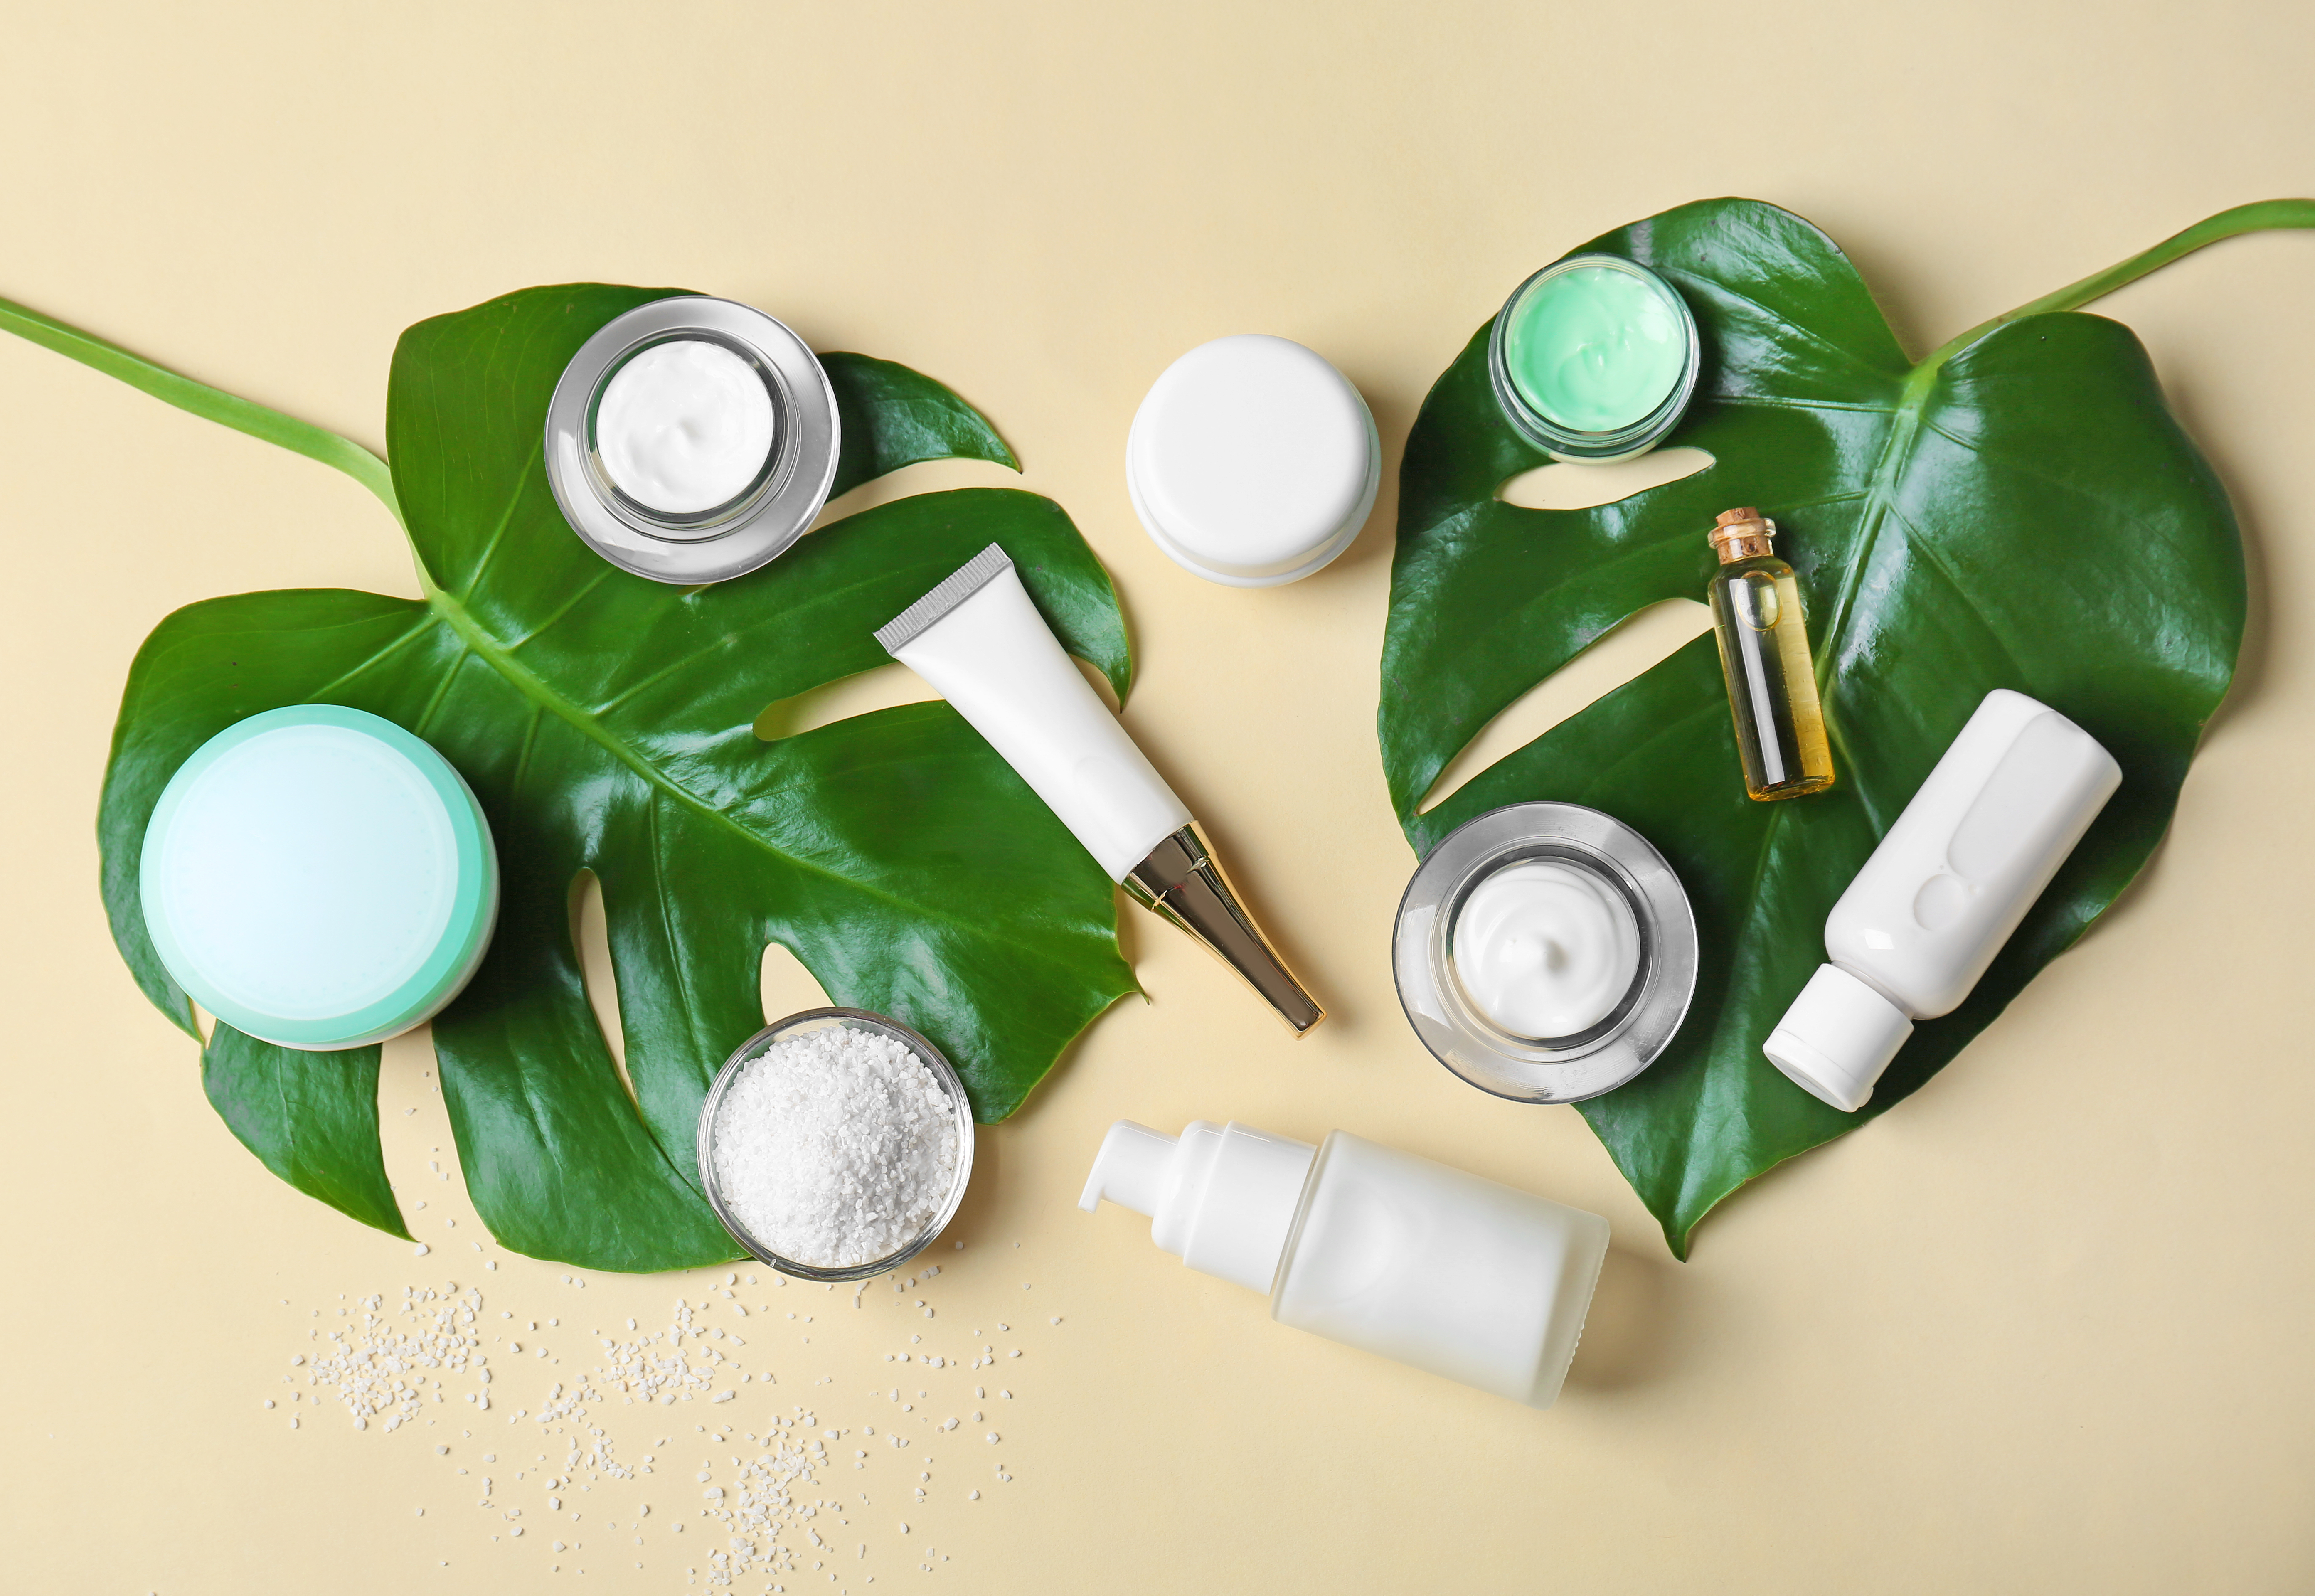 natural skin care products layed out on top of green leaves